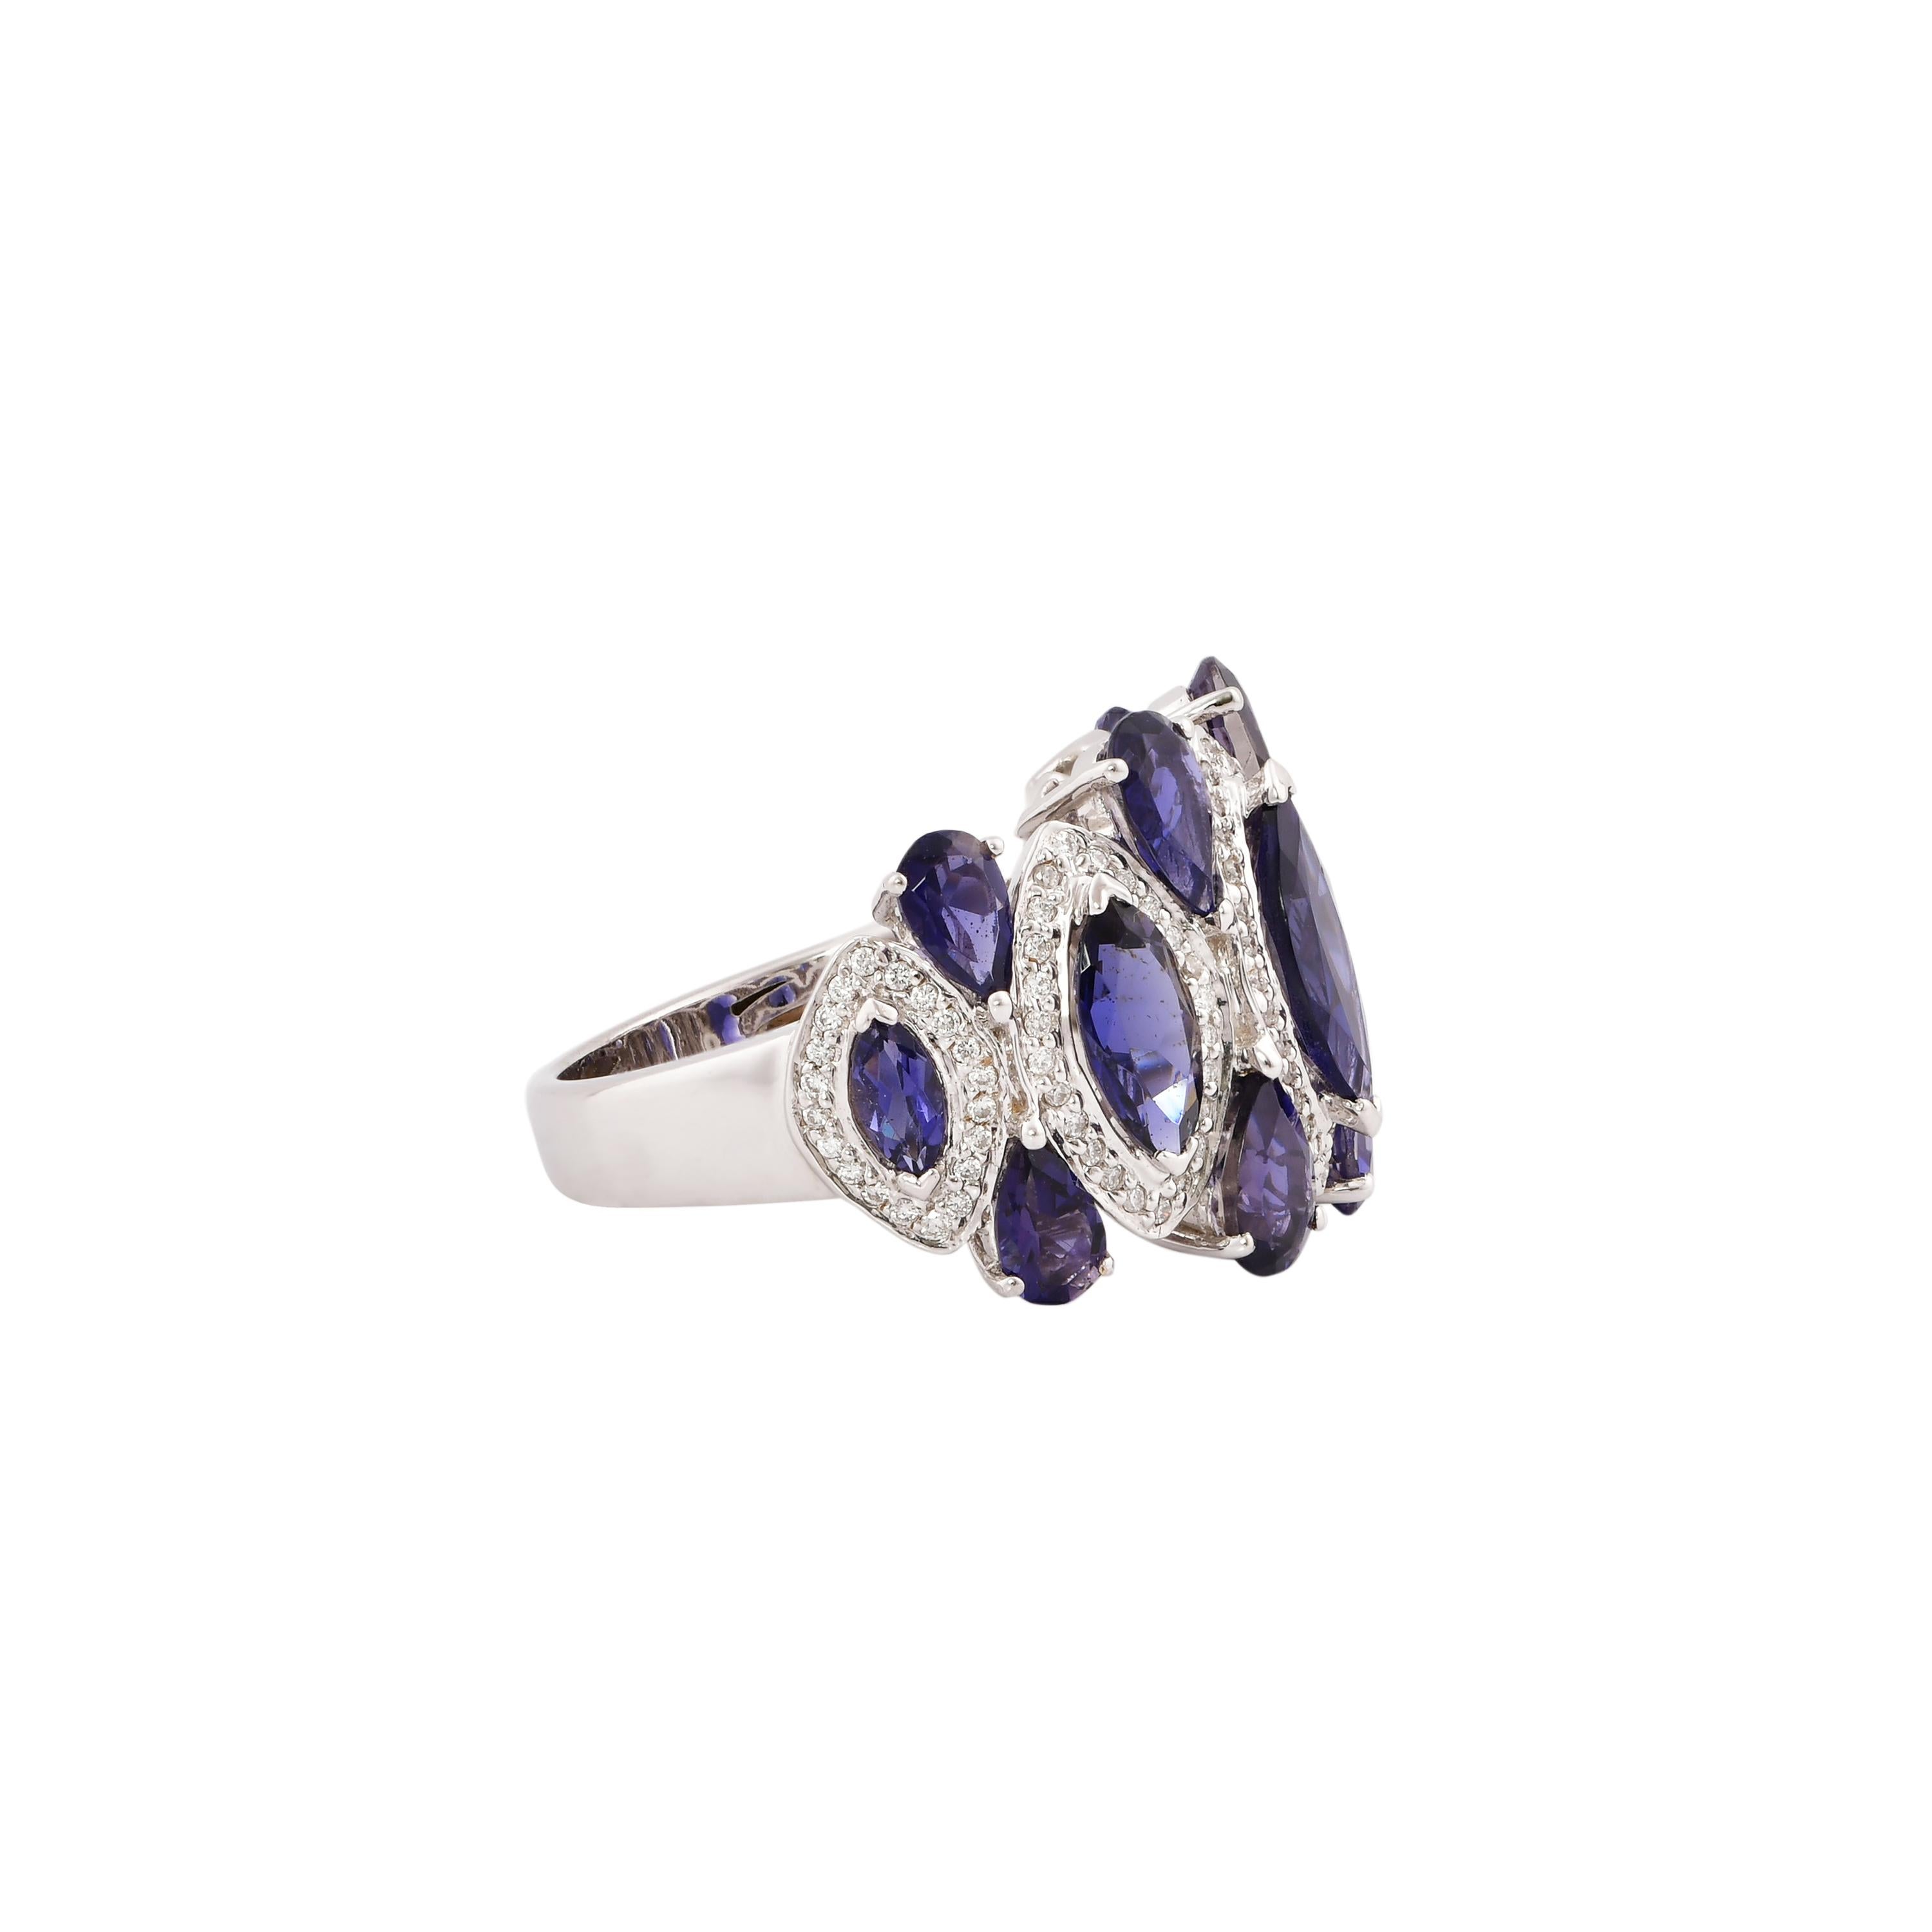 Sunita Nahata presents a collection of fancy cocktail rings with gorgeous gemstones. This ring uniquely pairs pear and marquise shaped iolite accented with diamonds. The banded design makes the a striking yet subtle cocktail ring that will